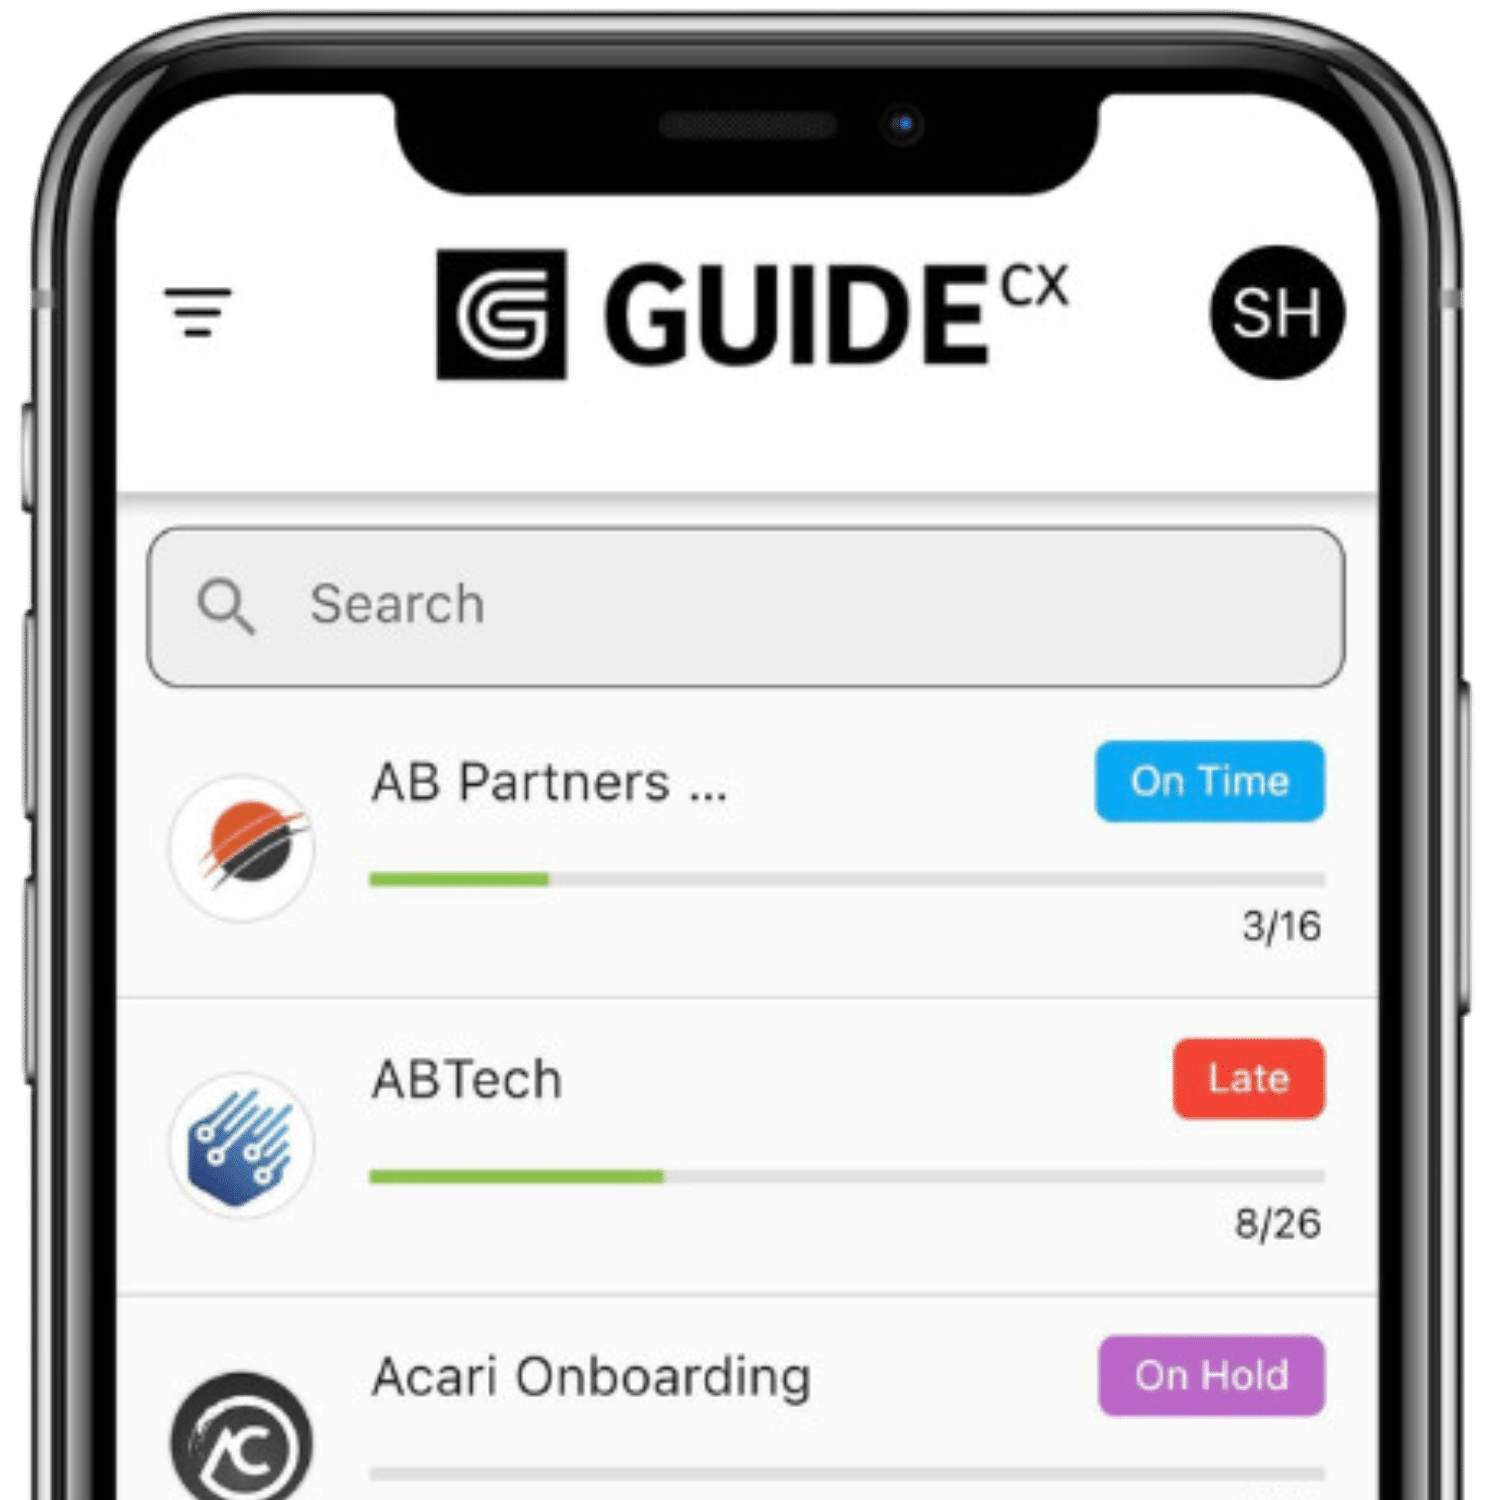 mobile app for GUIDEcx onboarding platform. Showing what the platform looks like in the mobile app.